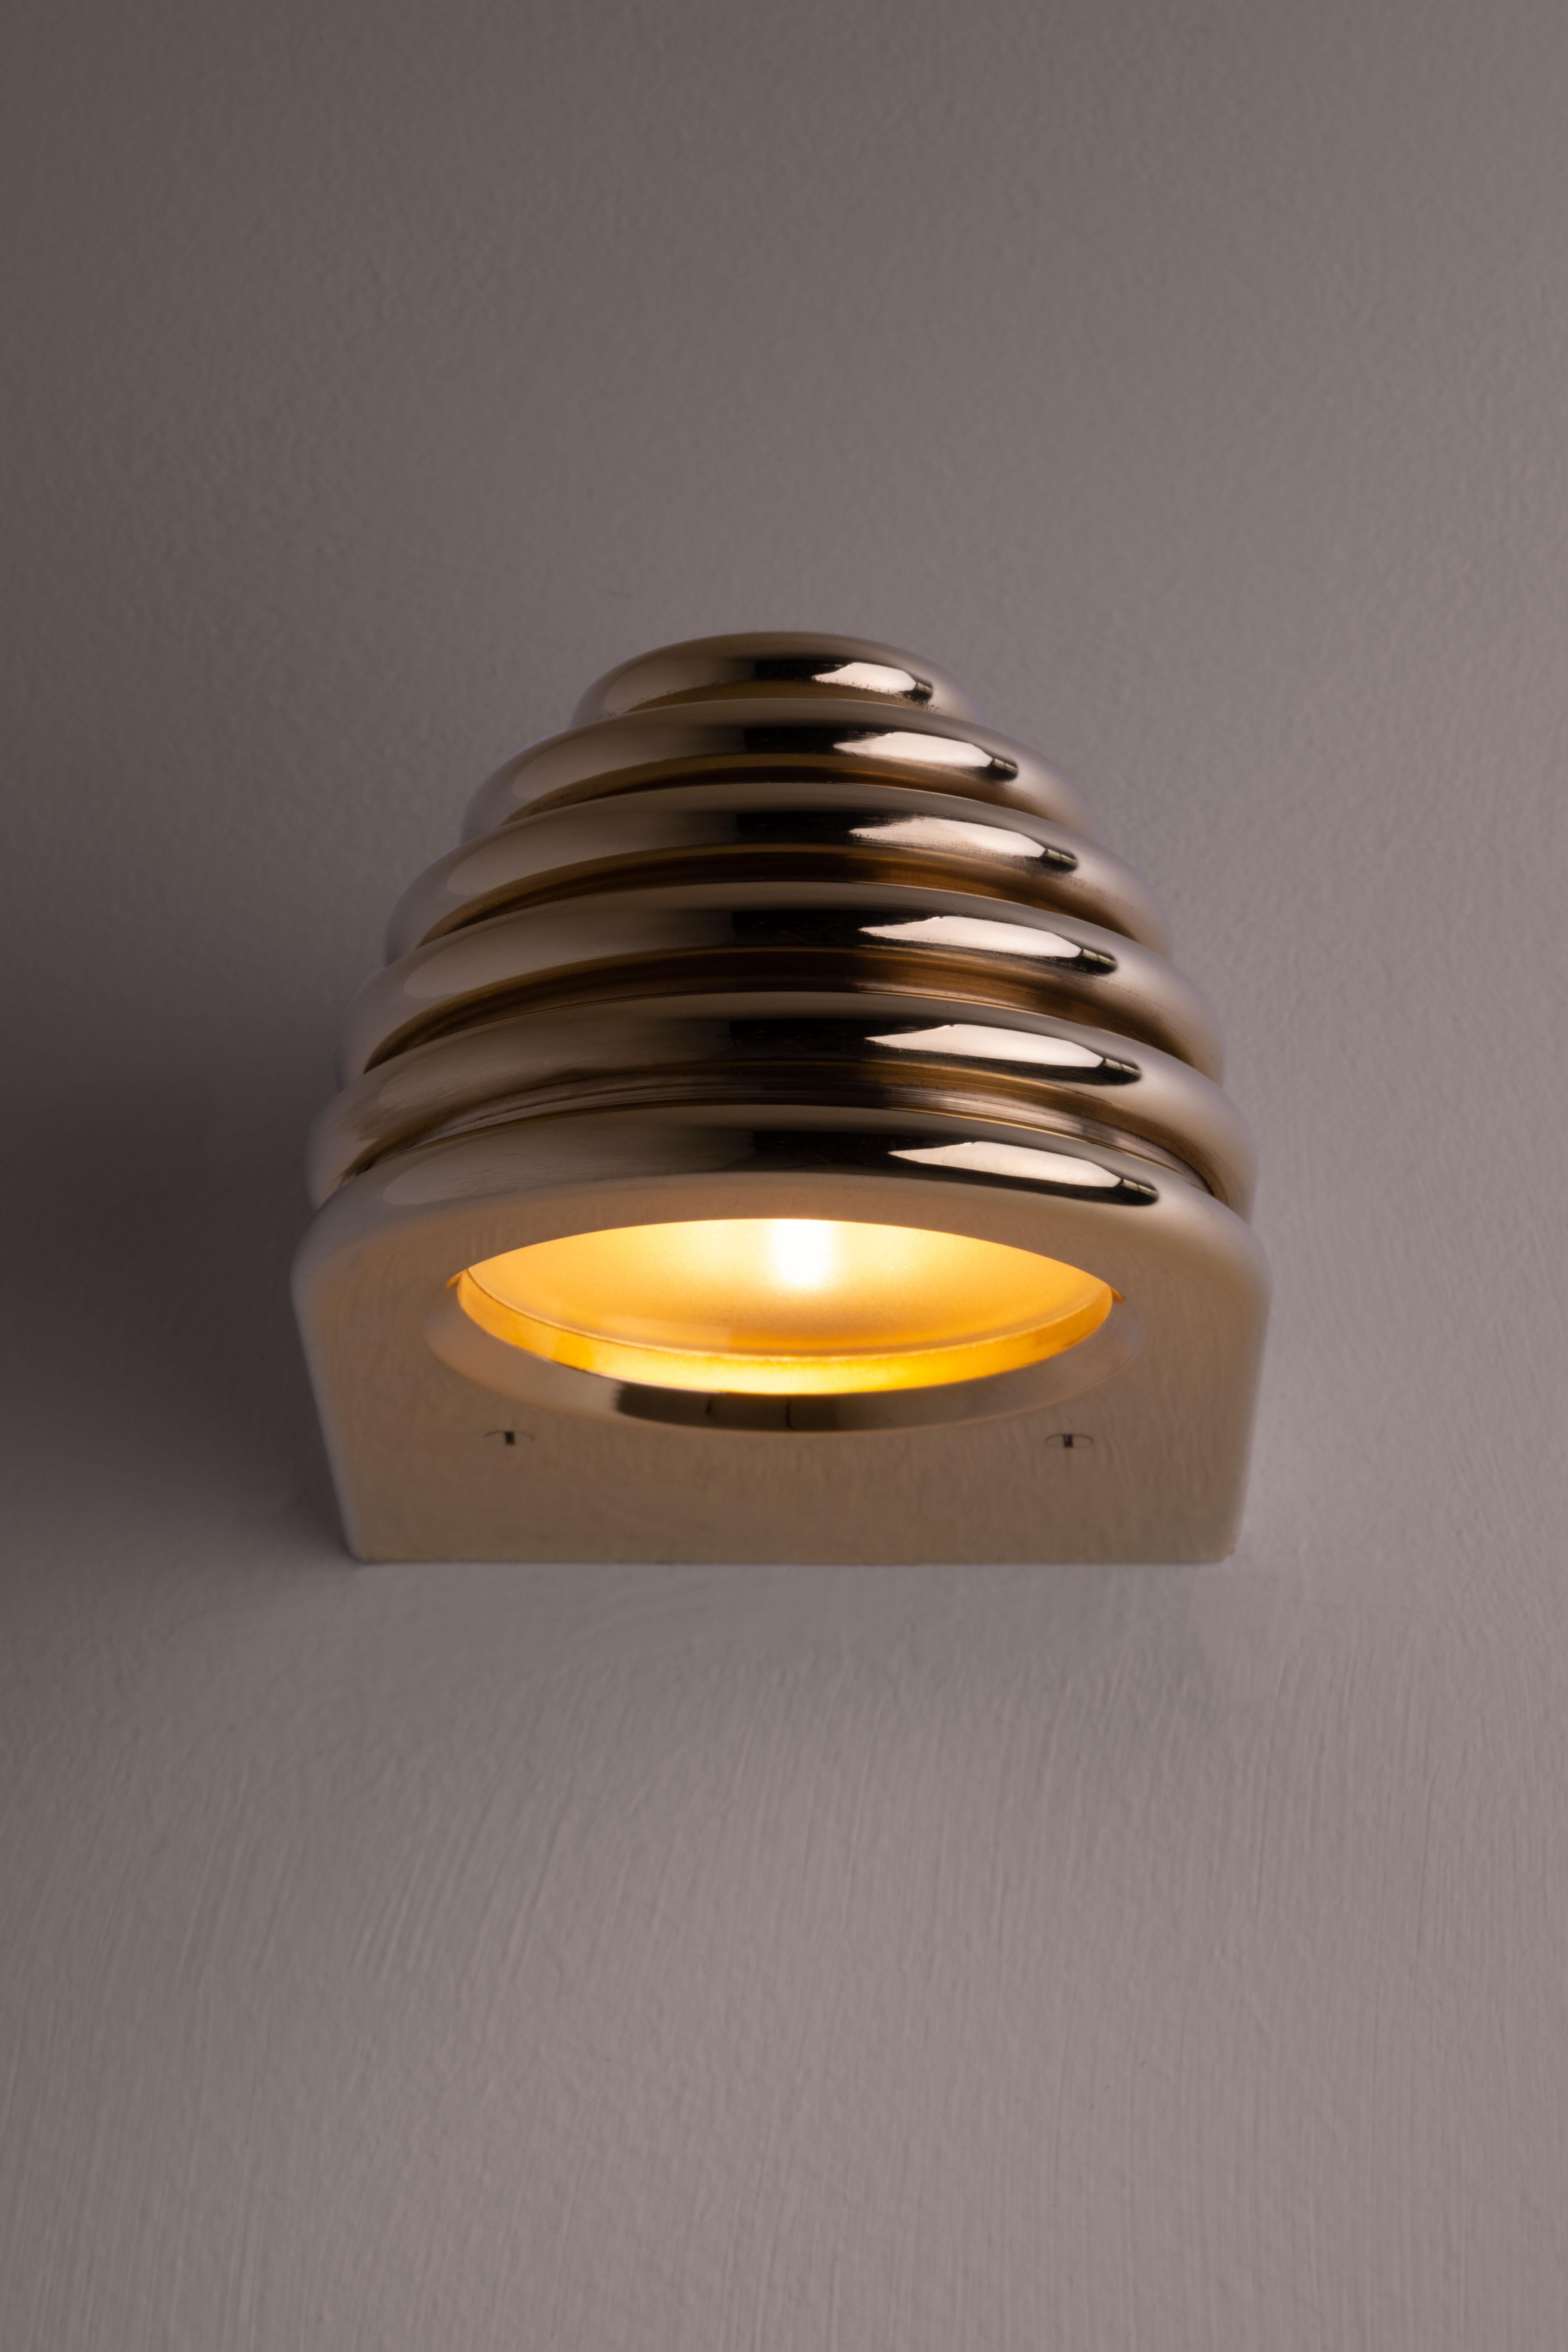 Brass The Insulator '0' Sconce in polished brass by NOVOCASTRIAN made in Great Britain For Sale